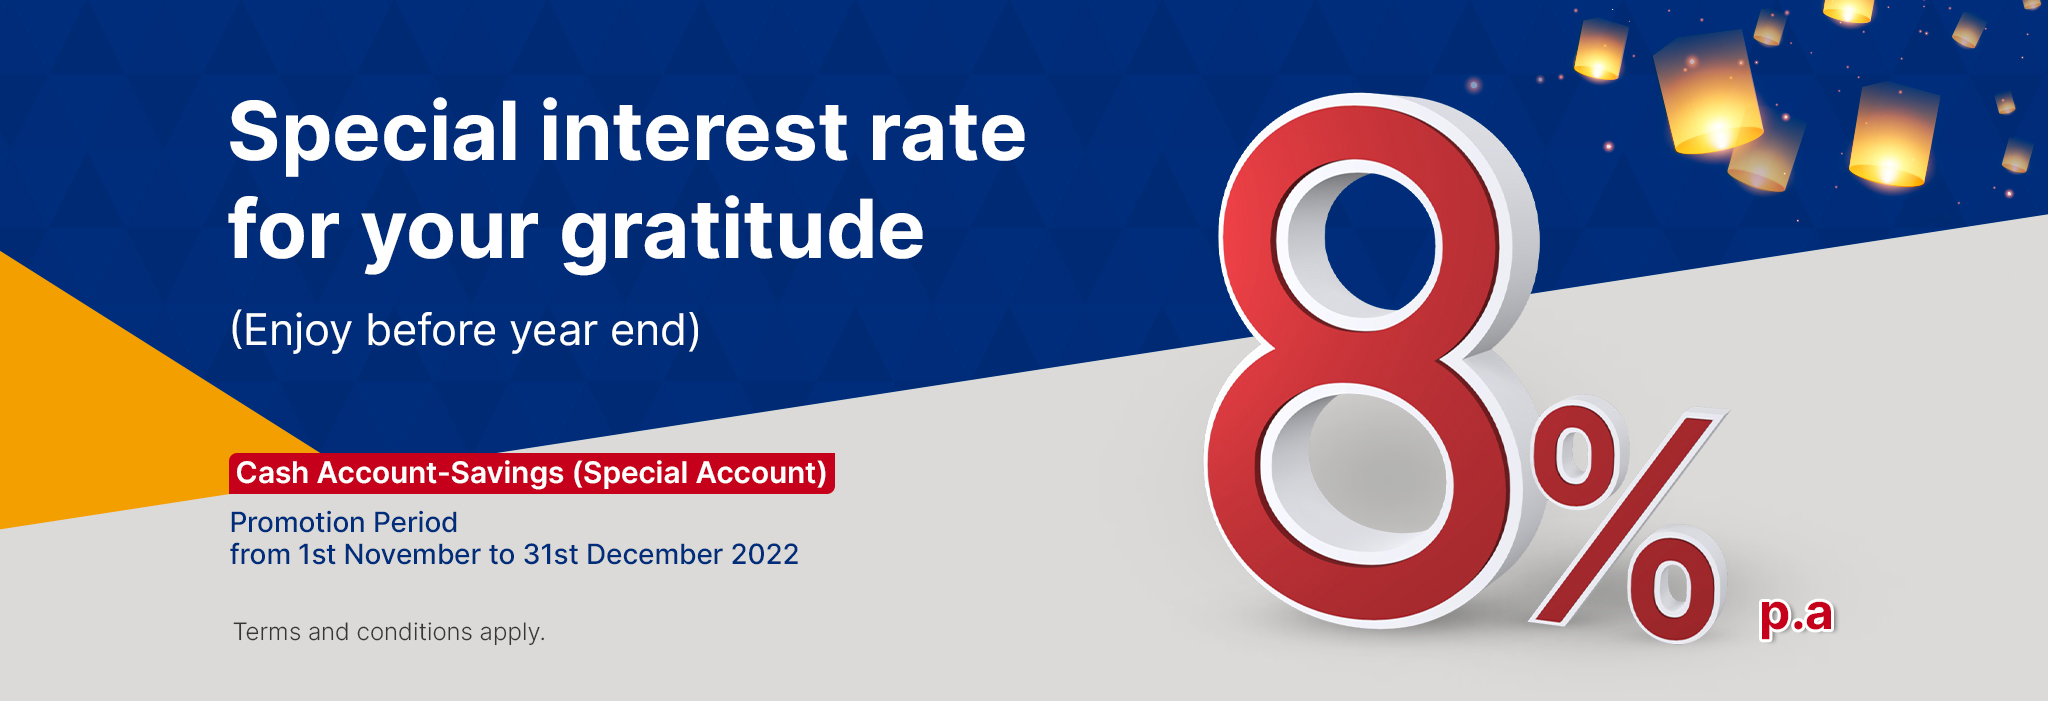 Special Interest Rate for your Gratitude